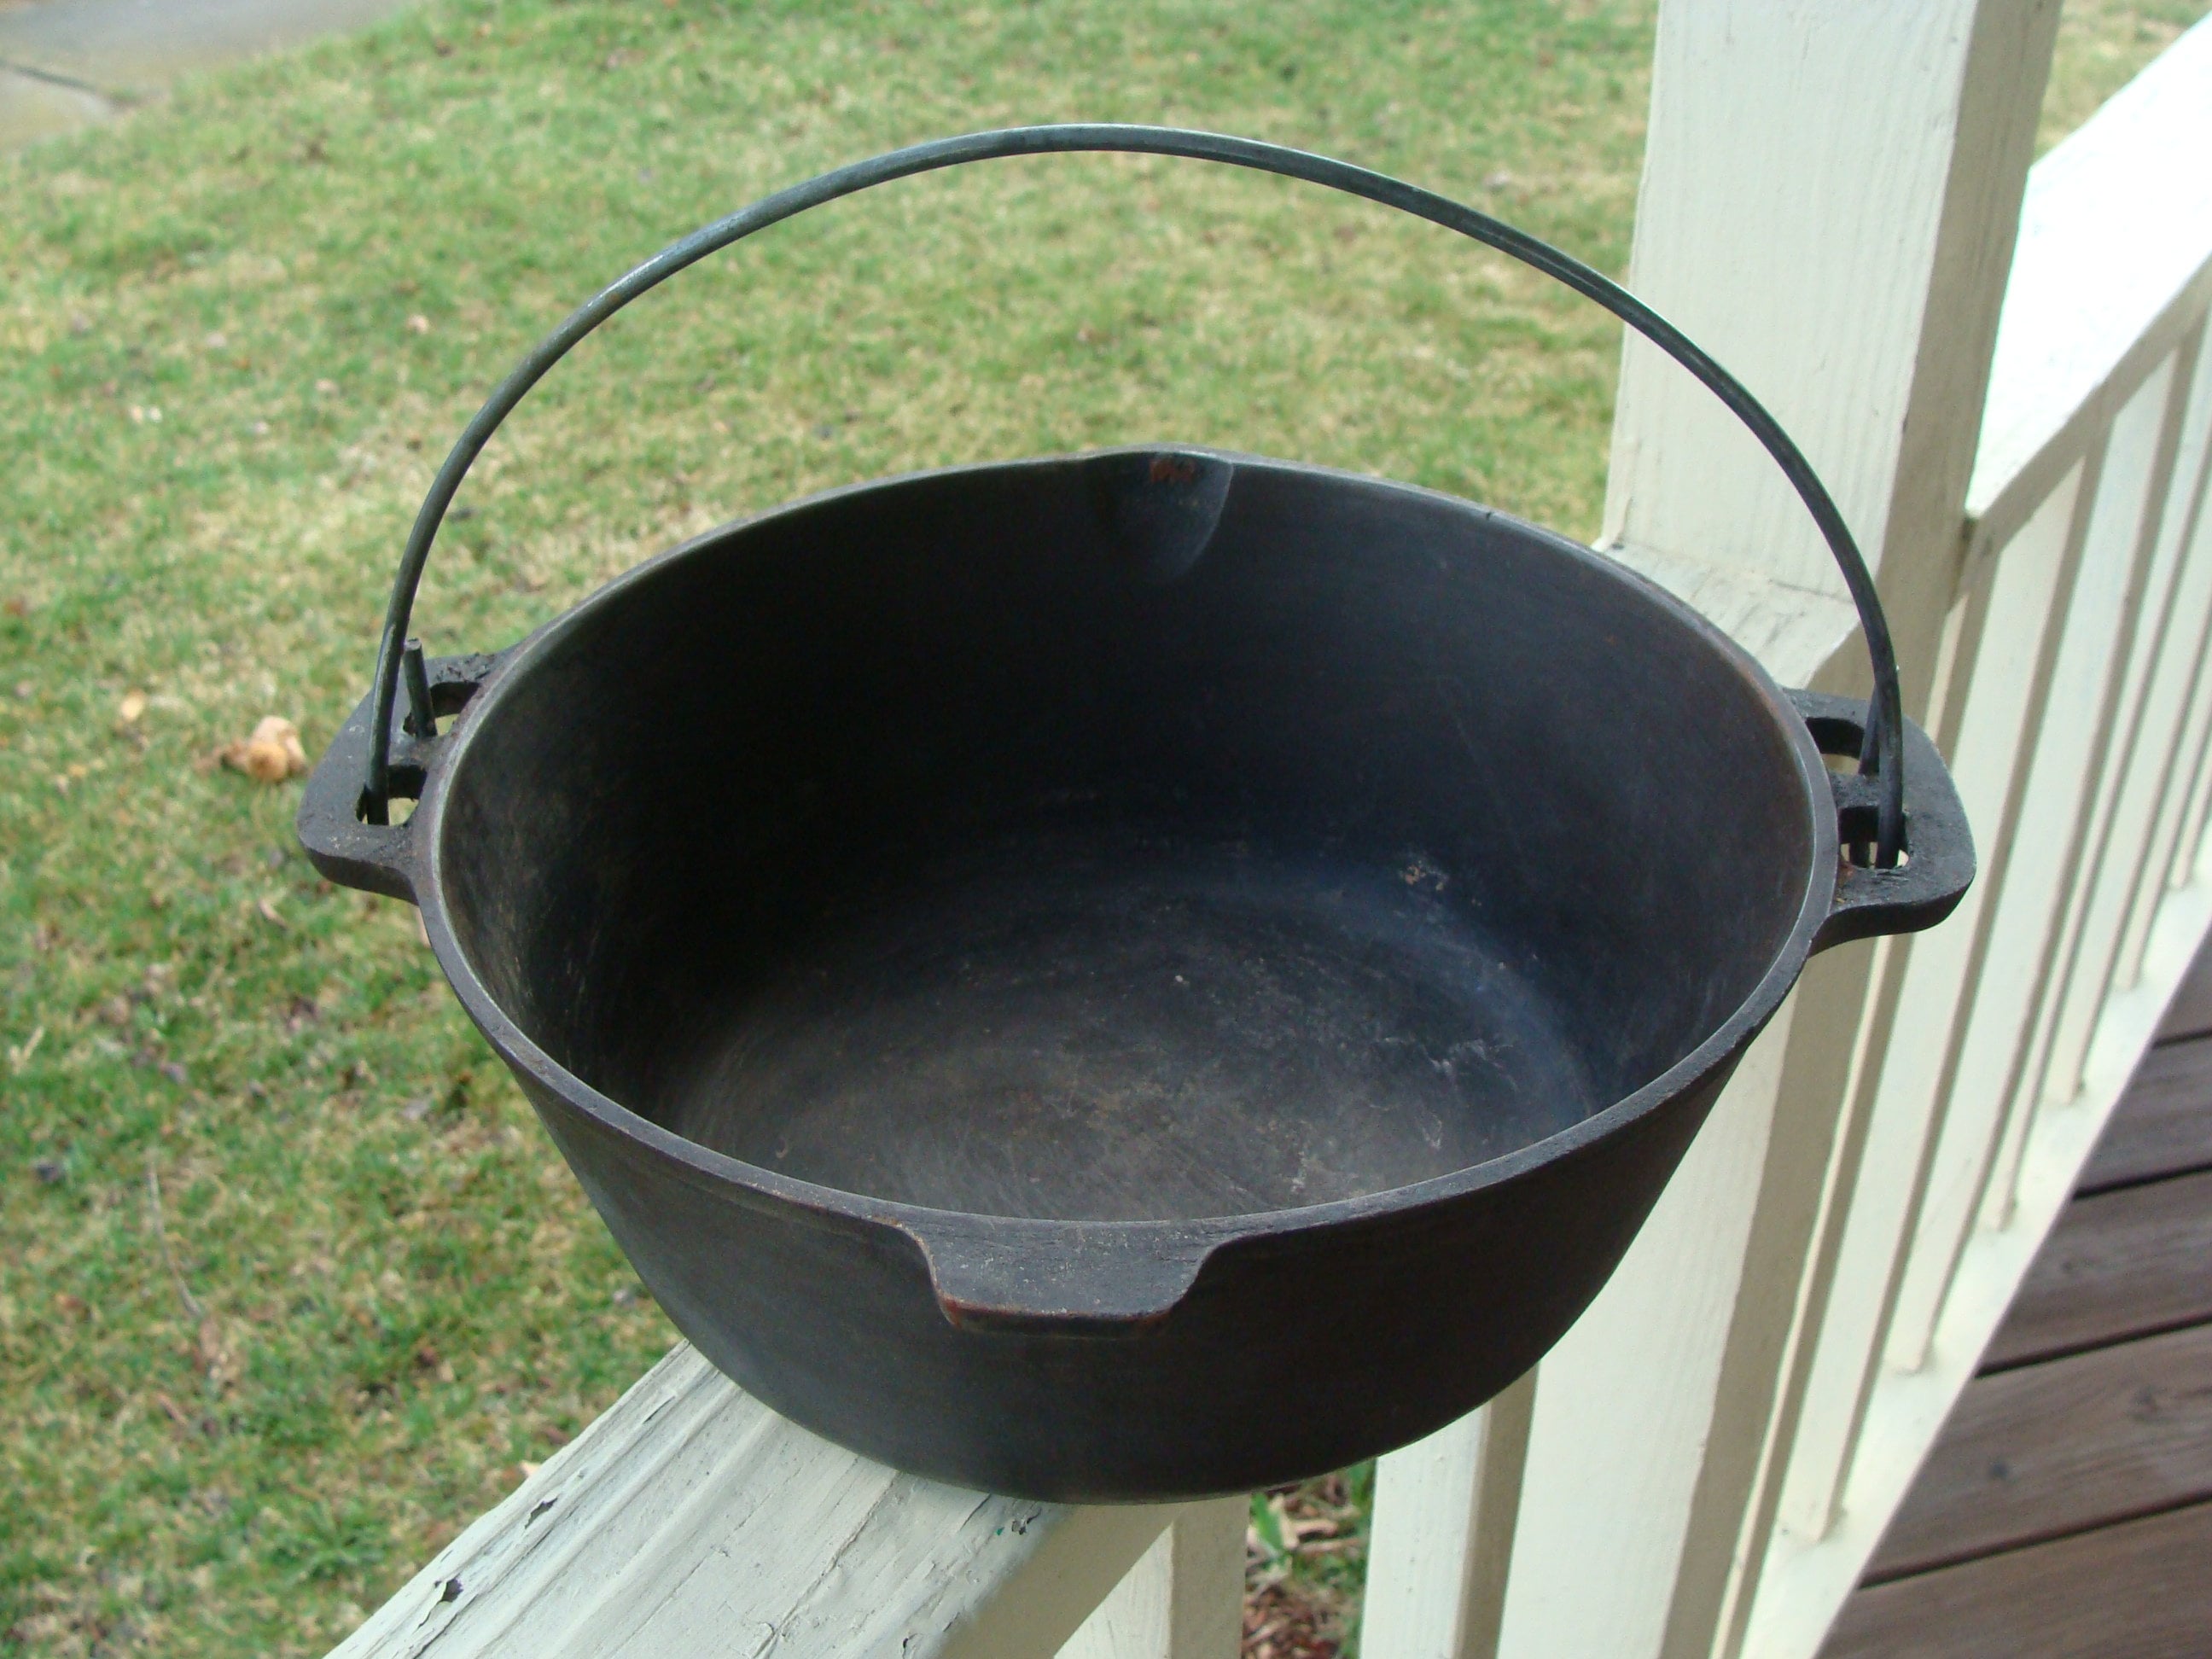 Dutch Ovens for sale in Buhl, Idaho, Facebook Marketplace